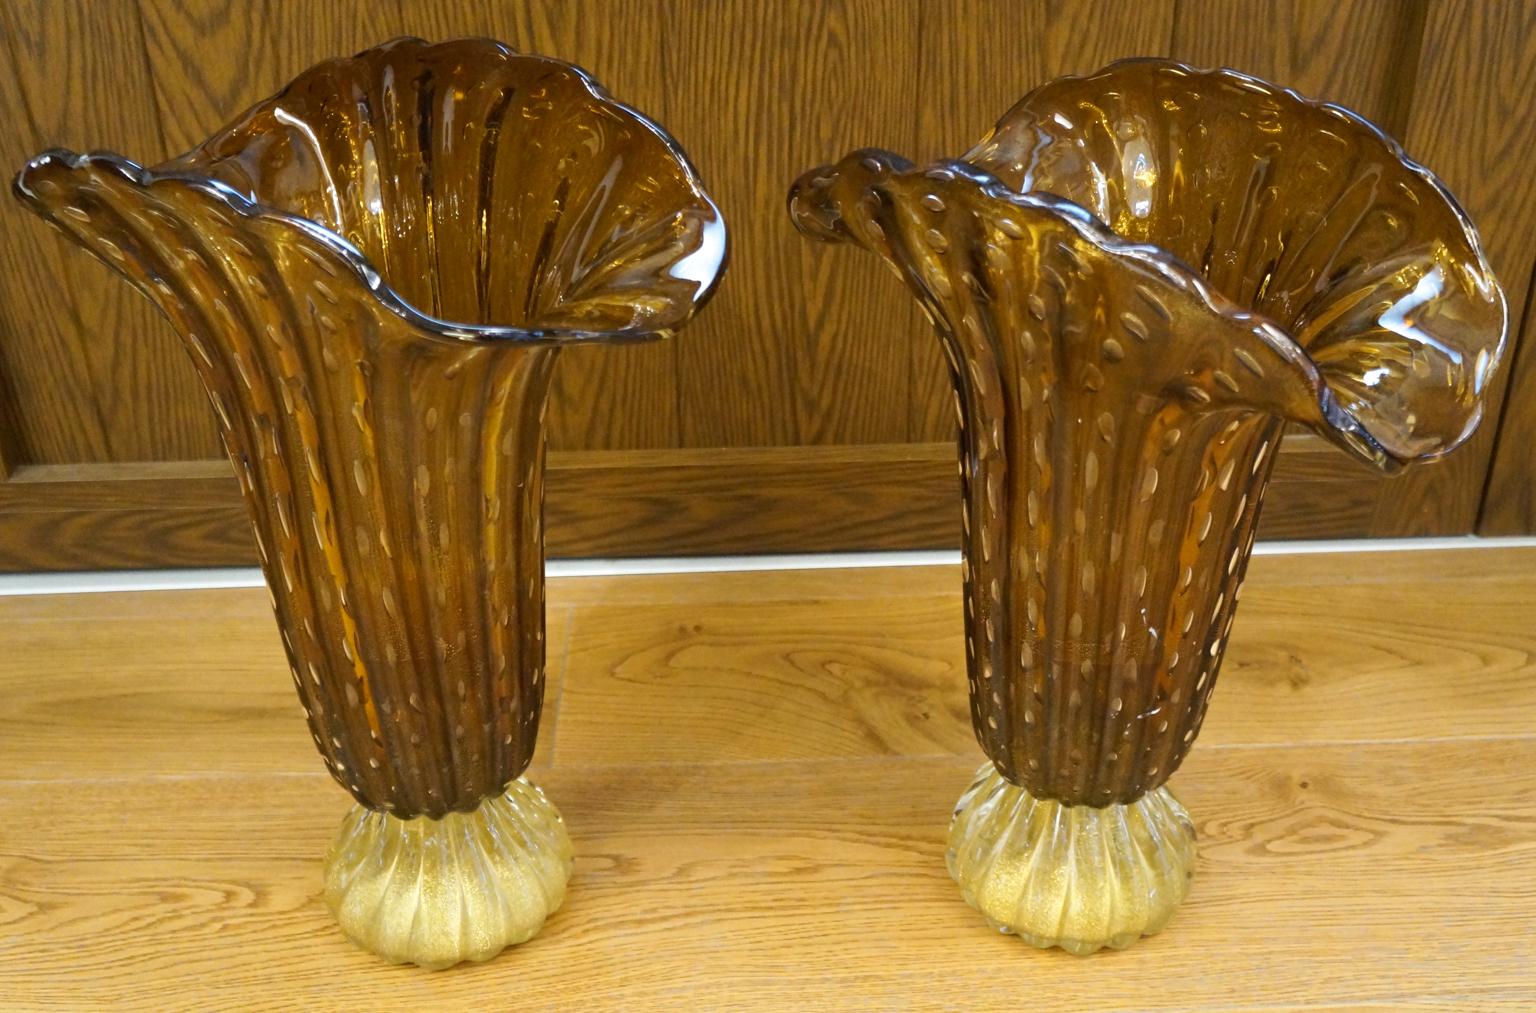 Toso Mid-Century Modern Tobacco Gold Pair of Murano Glass Vases Signed, 1987 For Sale 3